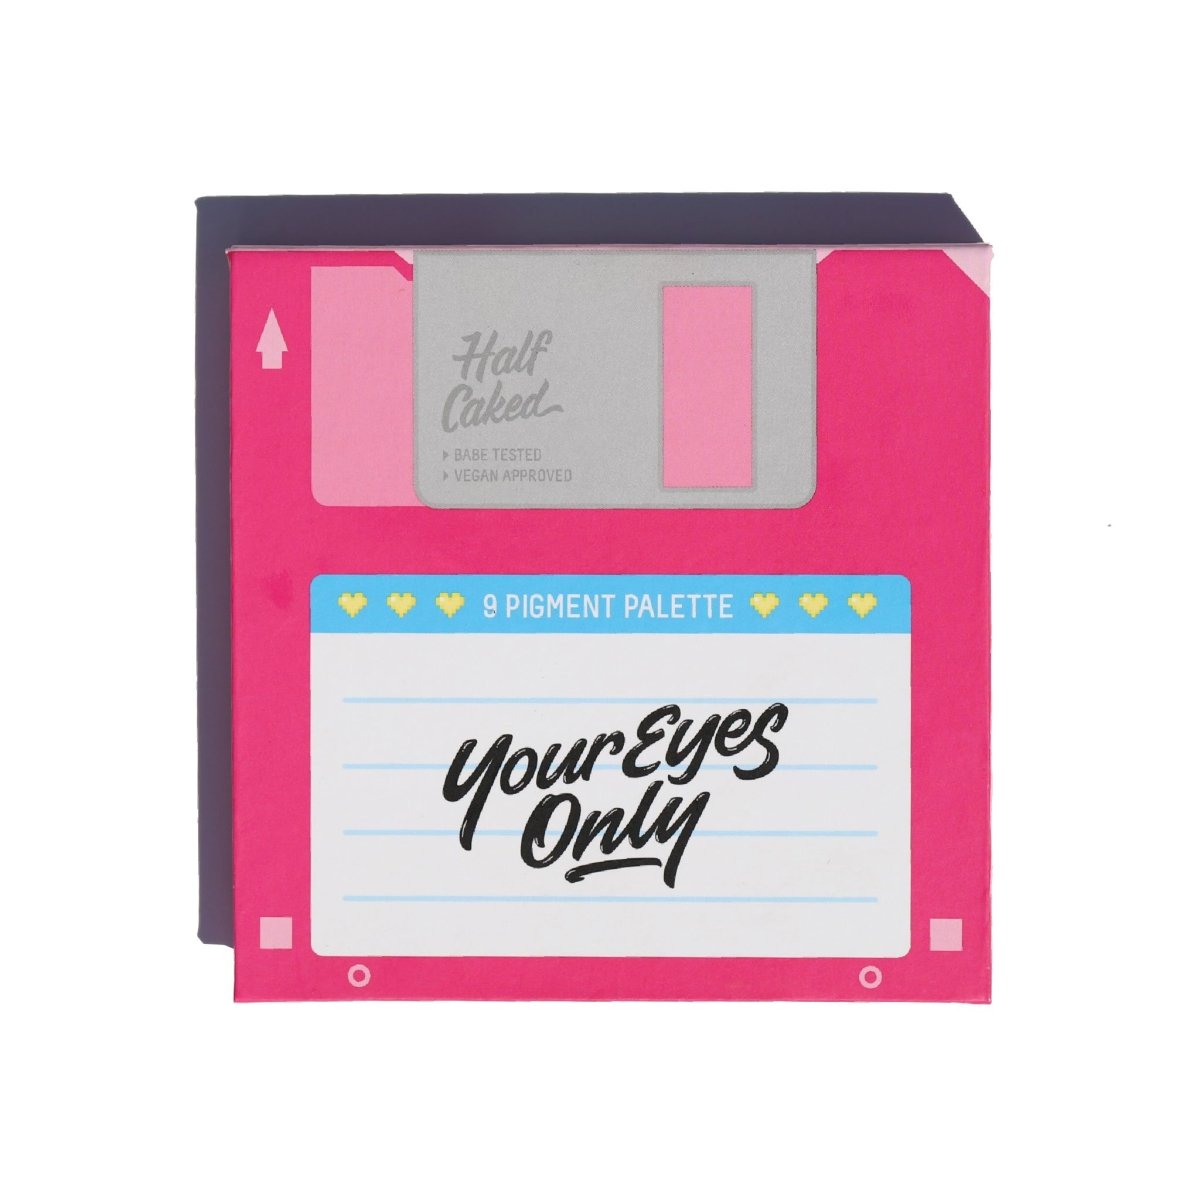 Floppy disk eyeshadow palette artwork for the Your Eyes Only Eyeshadow Palette created by Half Caked Makeup”